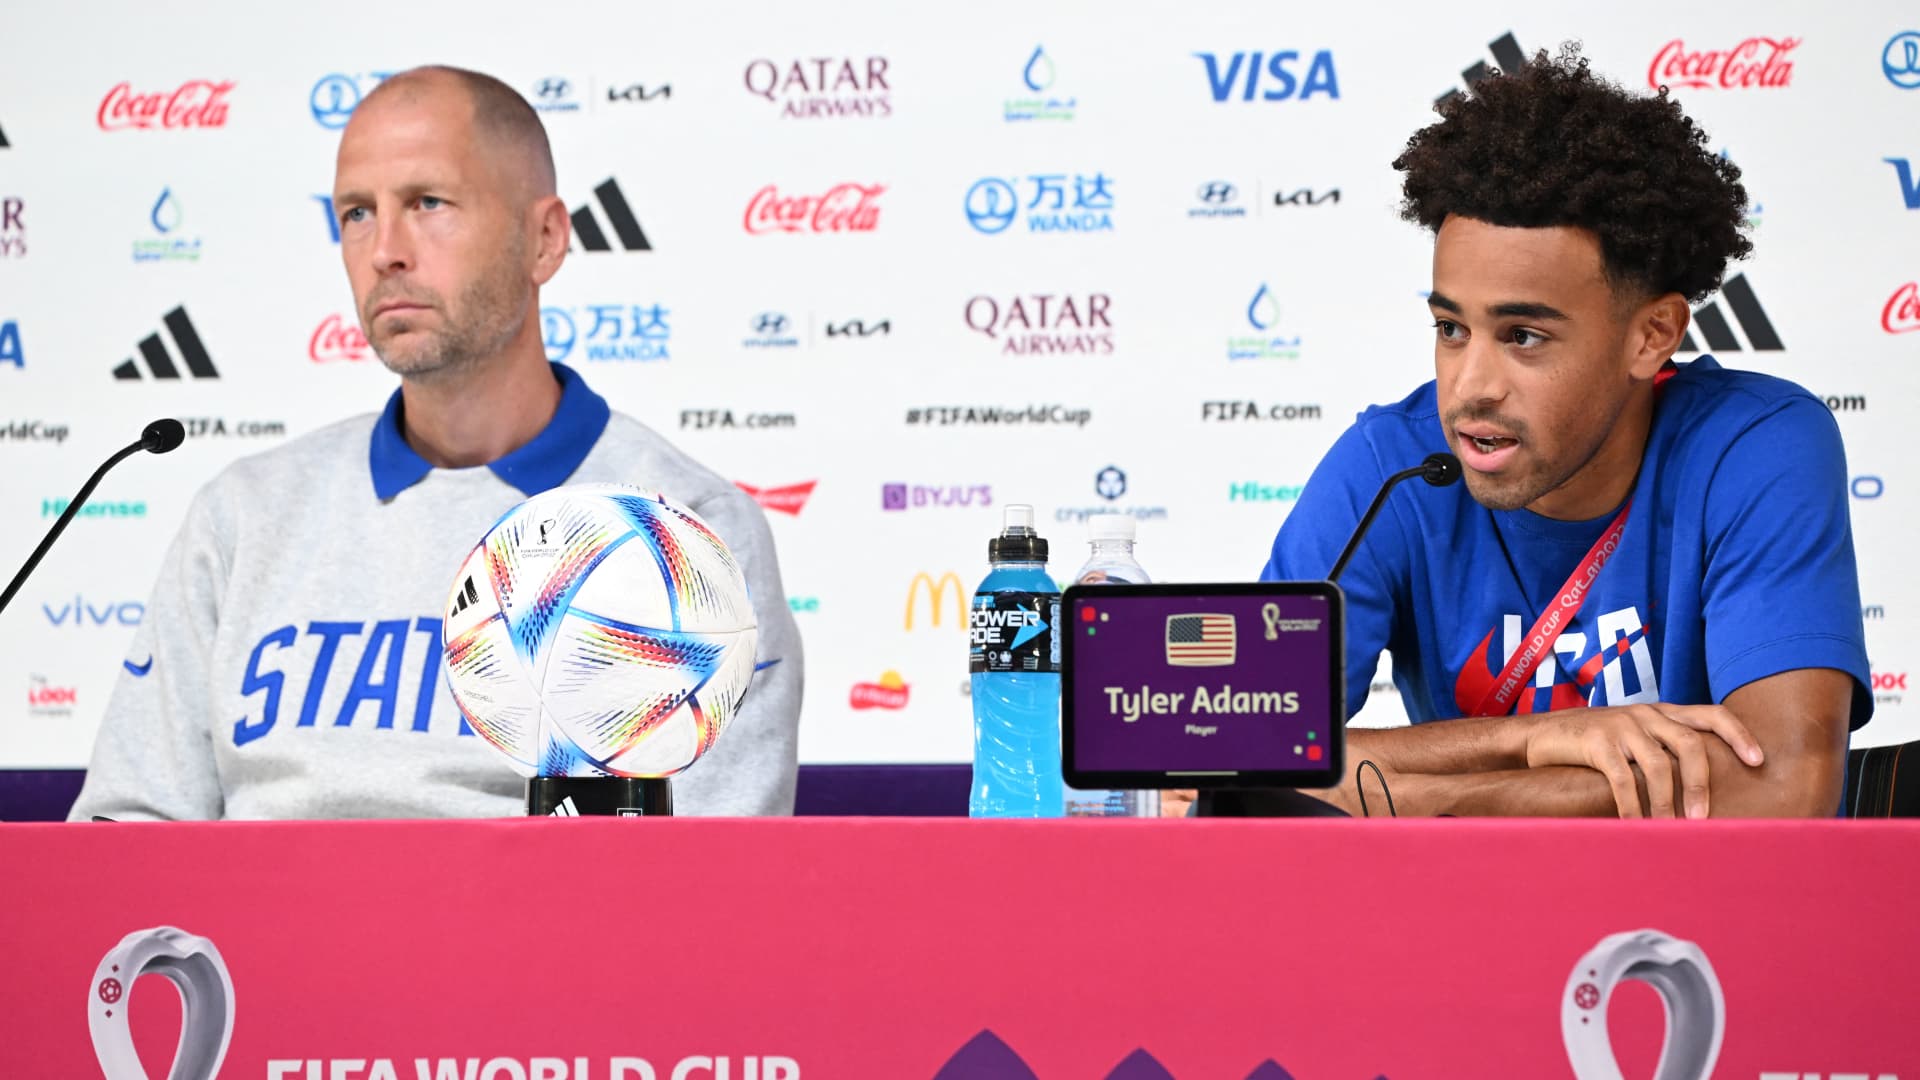 U.S. World Cup team pelted with political questions in tense press conference ahead of crucial Iran game